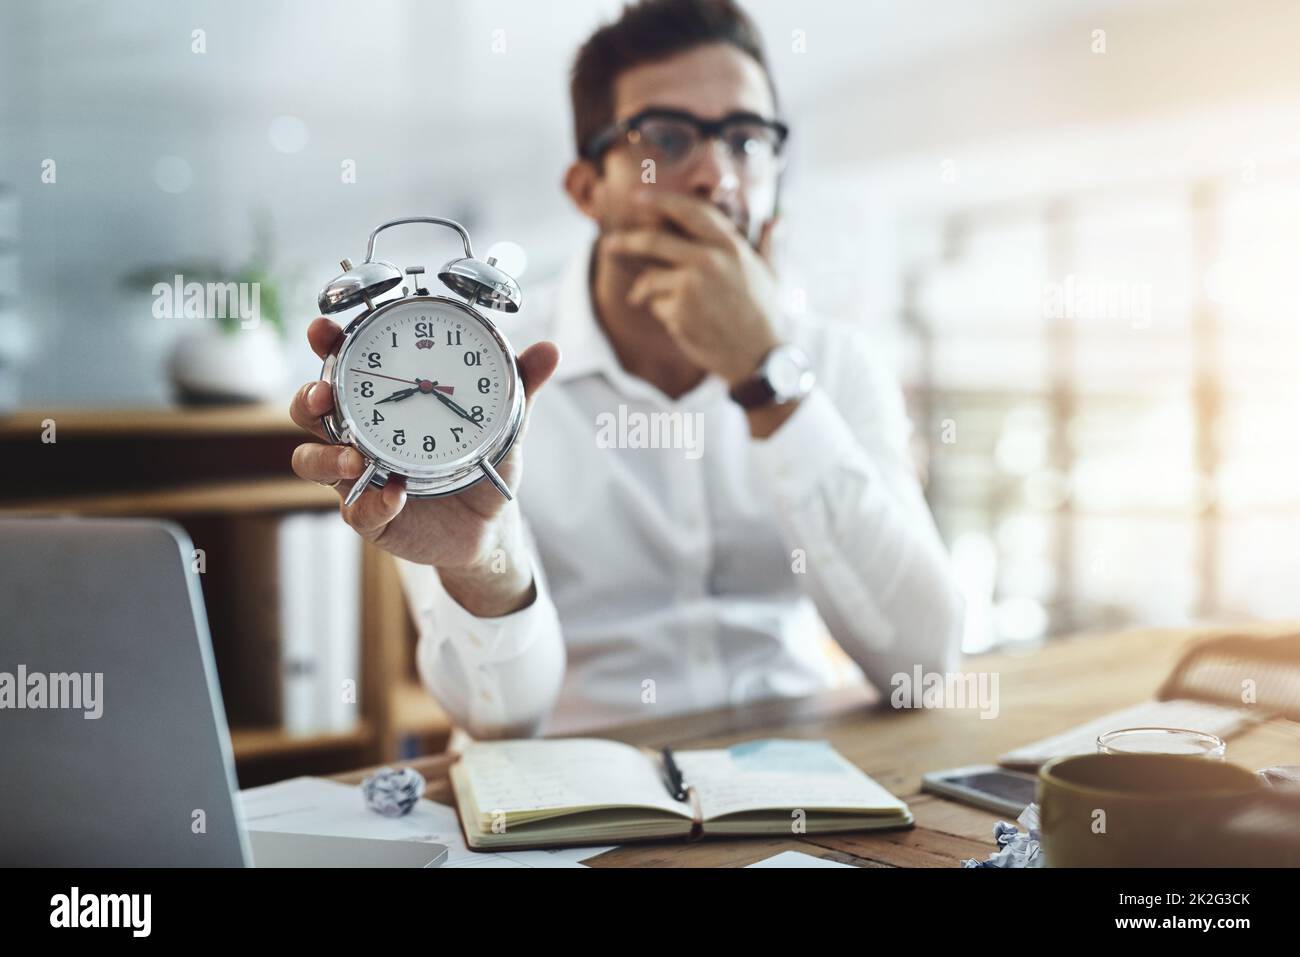 Dont let time spiral out of your control. Portrait of a young businessman looking stressed out while holding a clock in an office. Stock Photo